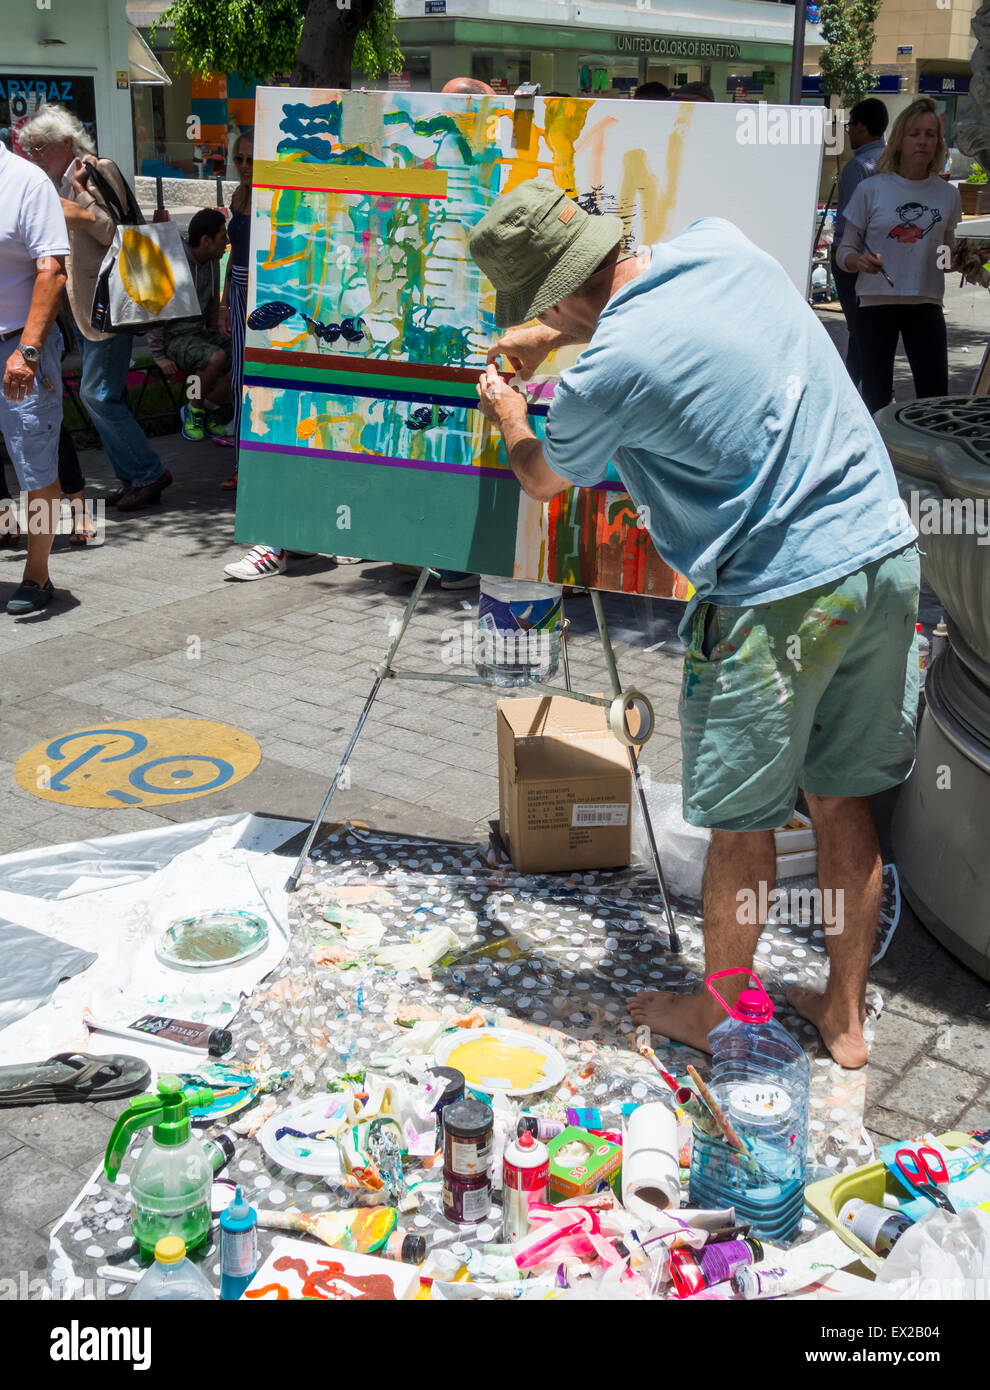 Las Palmas, Gran Canaria, Canary Islands, Spain. 4th July, 2015. 180  artists compete for a share of the 12,000 prize money at the anual speed  painting competition in Las Palmas, the capital